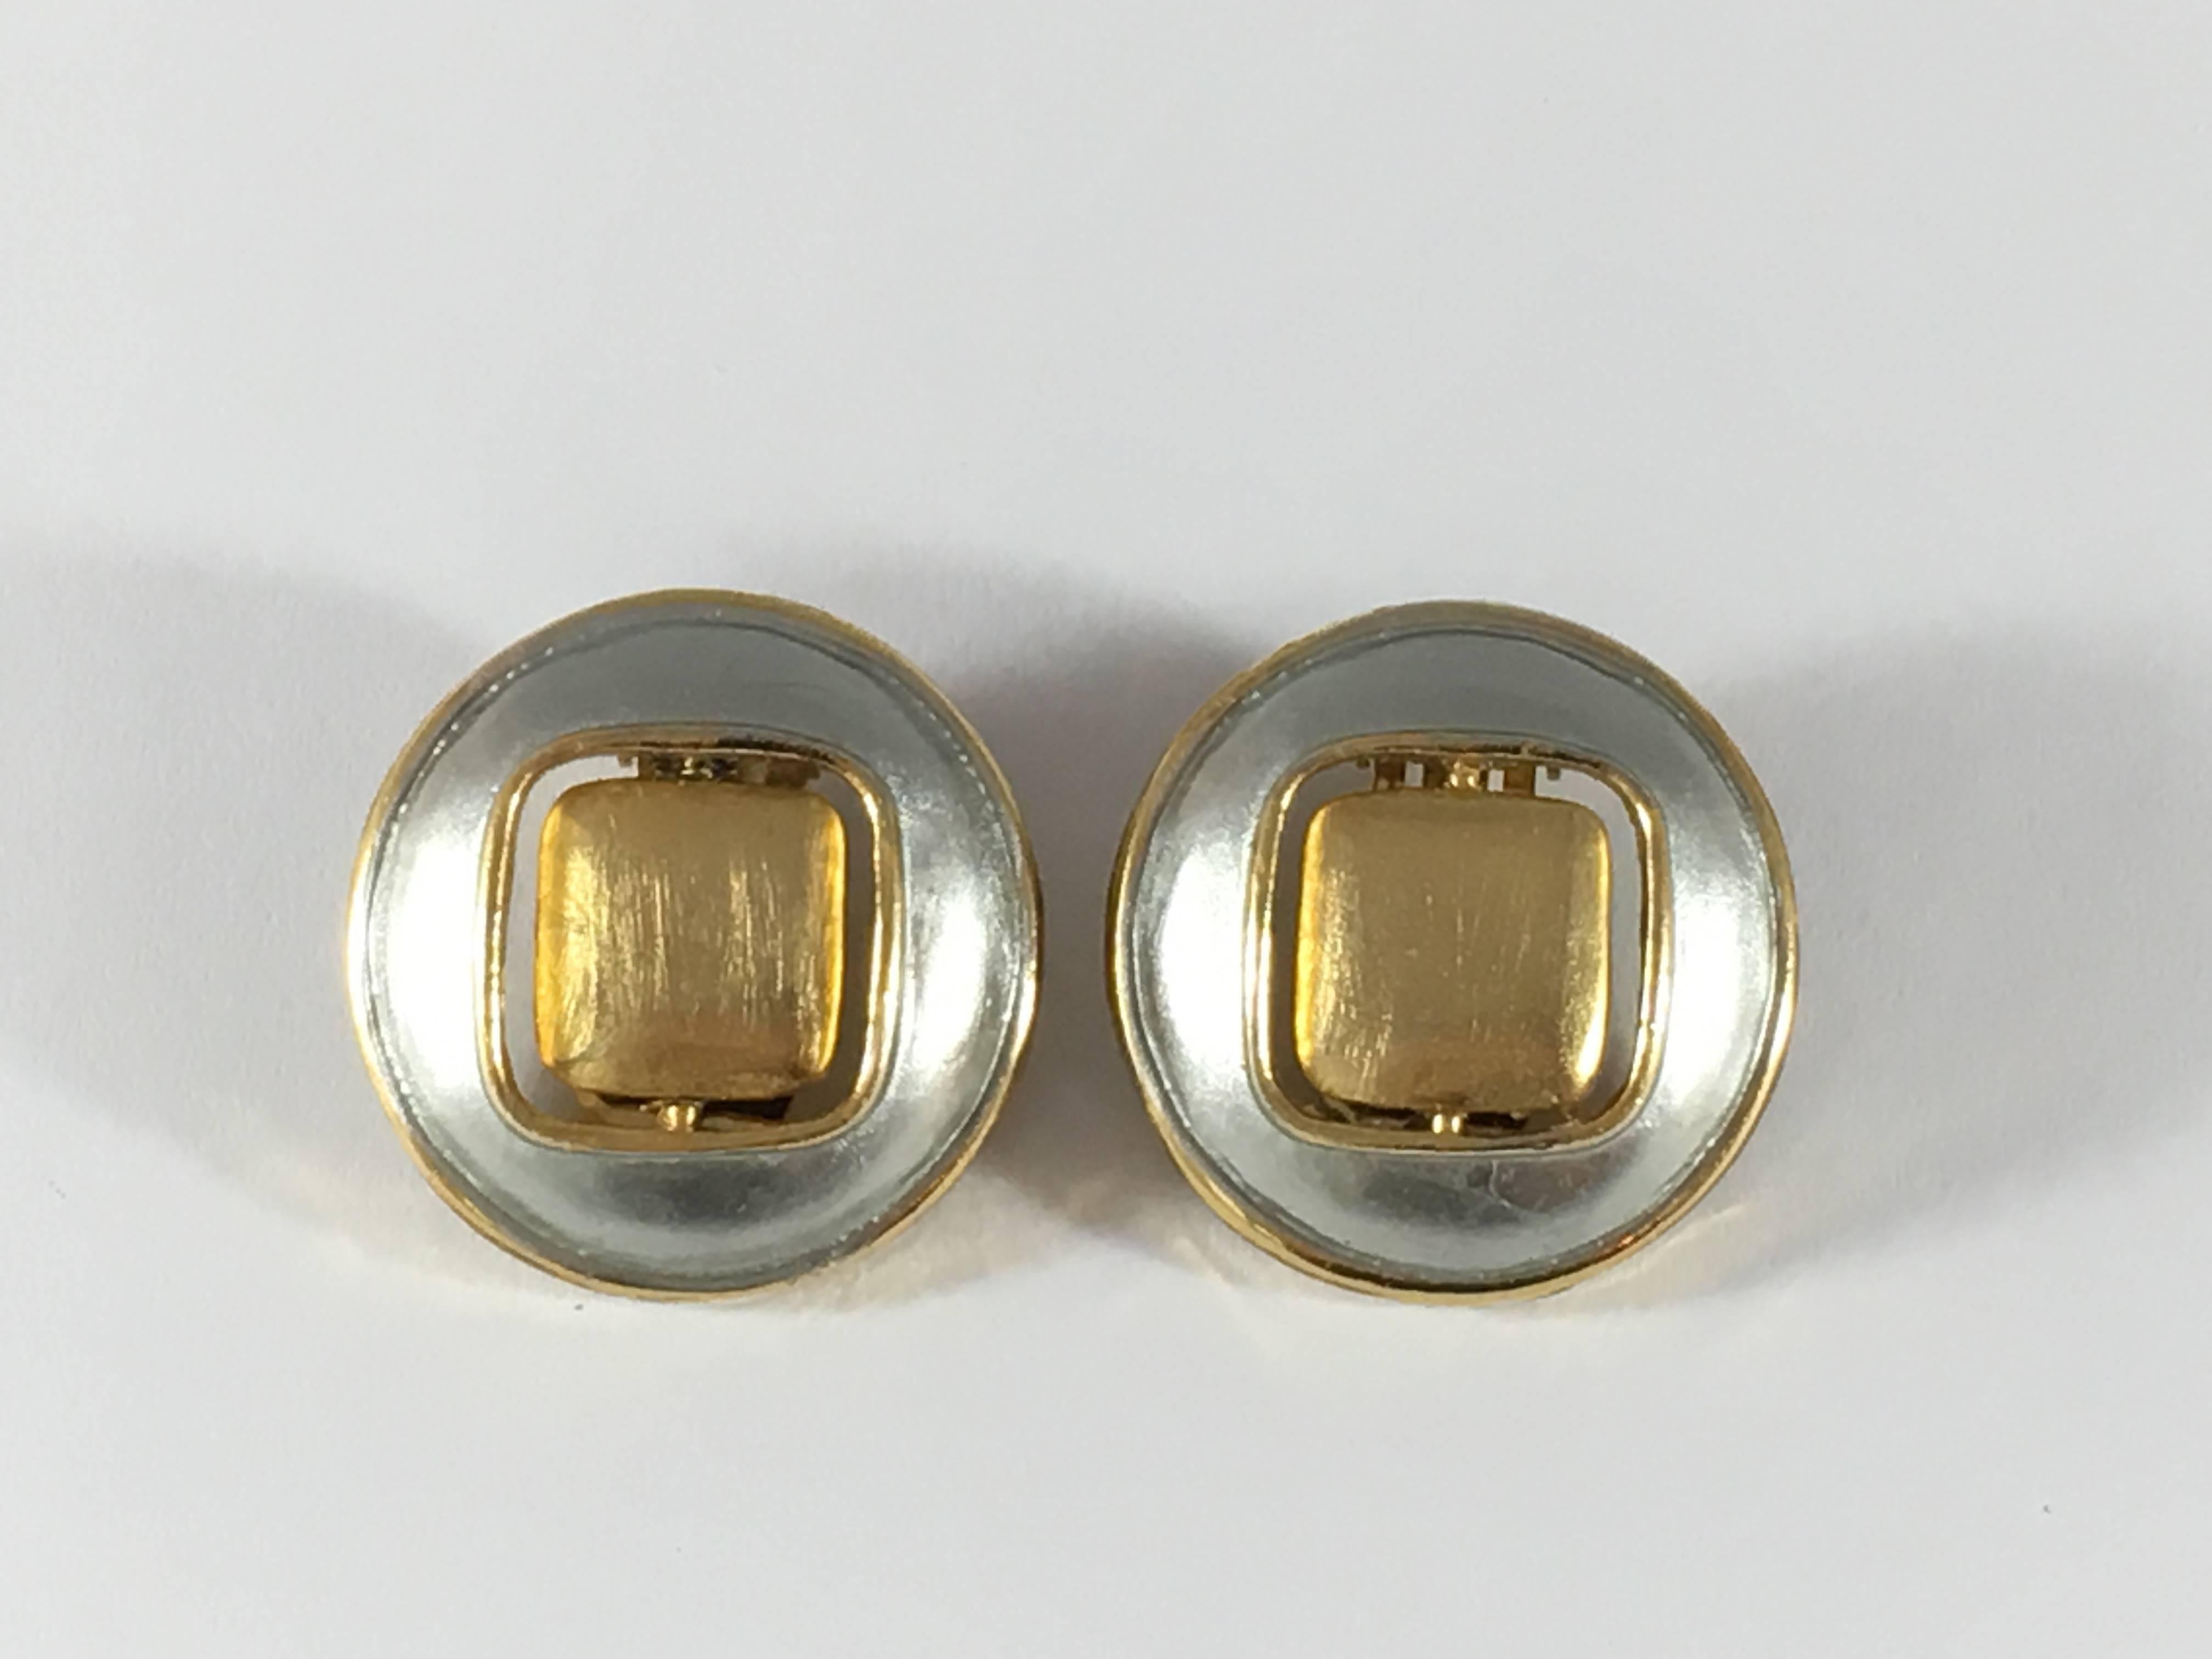 These earrings are MOD Pierre Cardin clip-on earrings are from the 1960s. They measure 1 inch in diameter and have reversible disks - one side is goldtone and the other is black enamel. They are marked 'Pierre Cardin' on the back. They are in